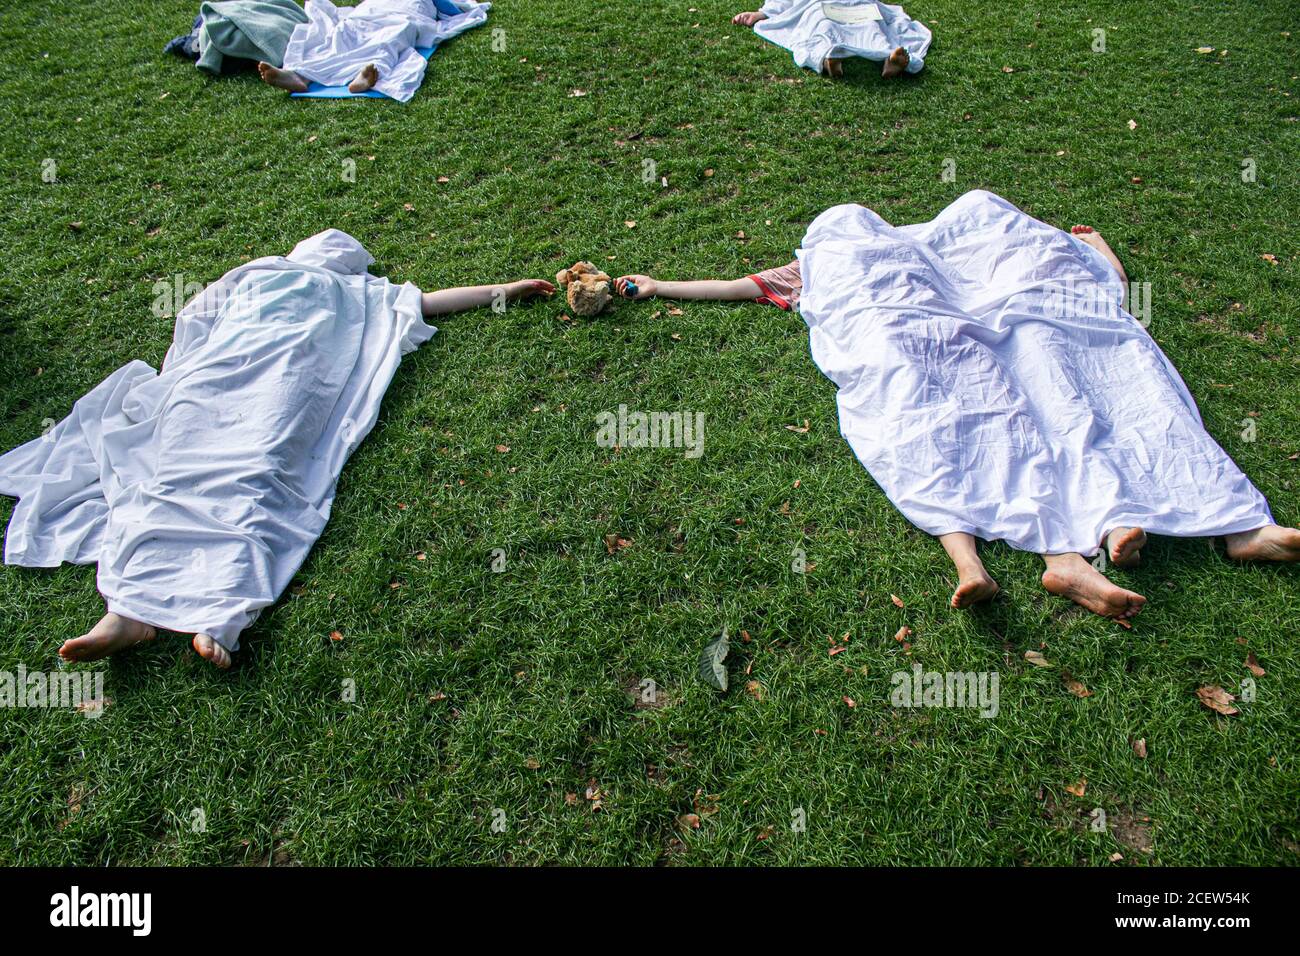 WESTMINSTER LONDON, UK - 2 September 2020 Climate activists from Extinction rebellion lying as a dead body under a white shroud  in Parliament Square. Extinction Rebellion have vowed  to continue protests over 12 days in London  due to the government’s failure to act on the climate and ecological emergency and demand the government act now  and to support the Climate and Ecological Emergency Bill. Credit: amer ghazzal/Alamy Live News Stock Photo